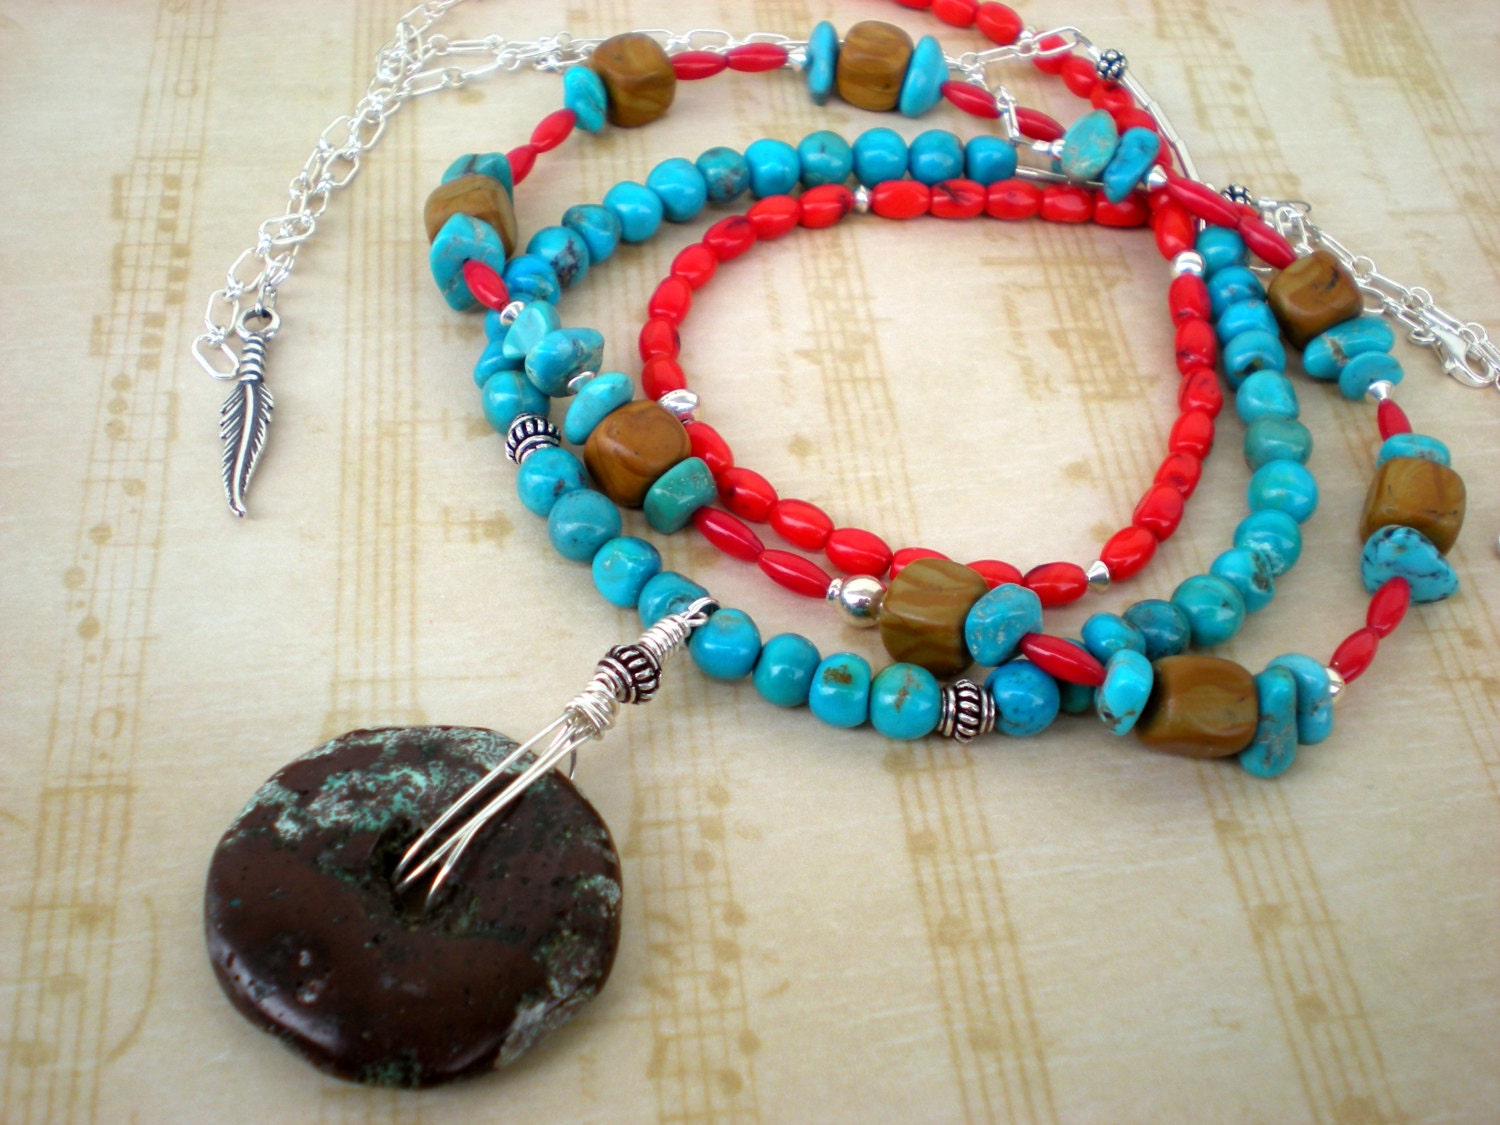 Campfire songs trio of beaded necklaces, turquoise, red coral, sterling silver, picture jasper, unique jewelry by Grey Girl Designs on Etsy - greygirldesigns